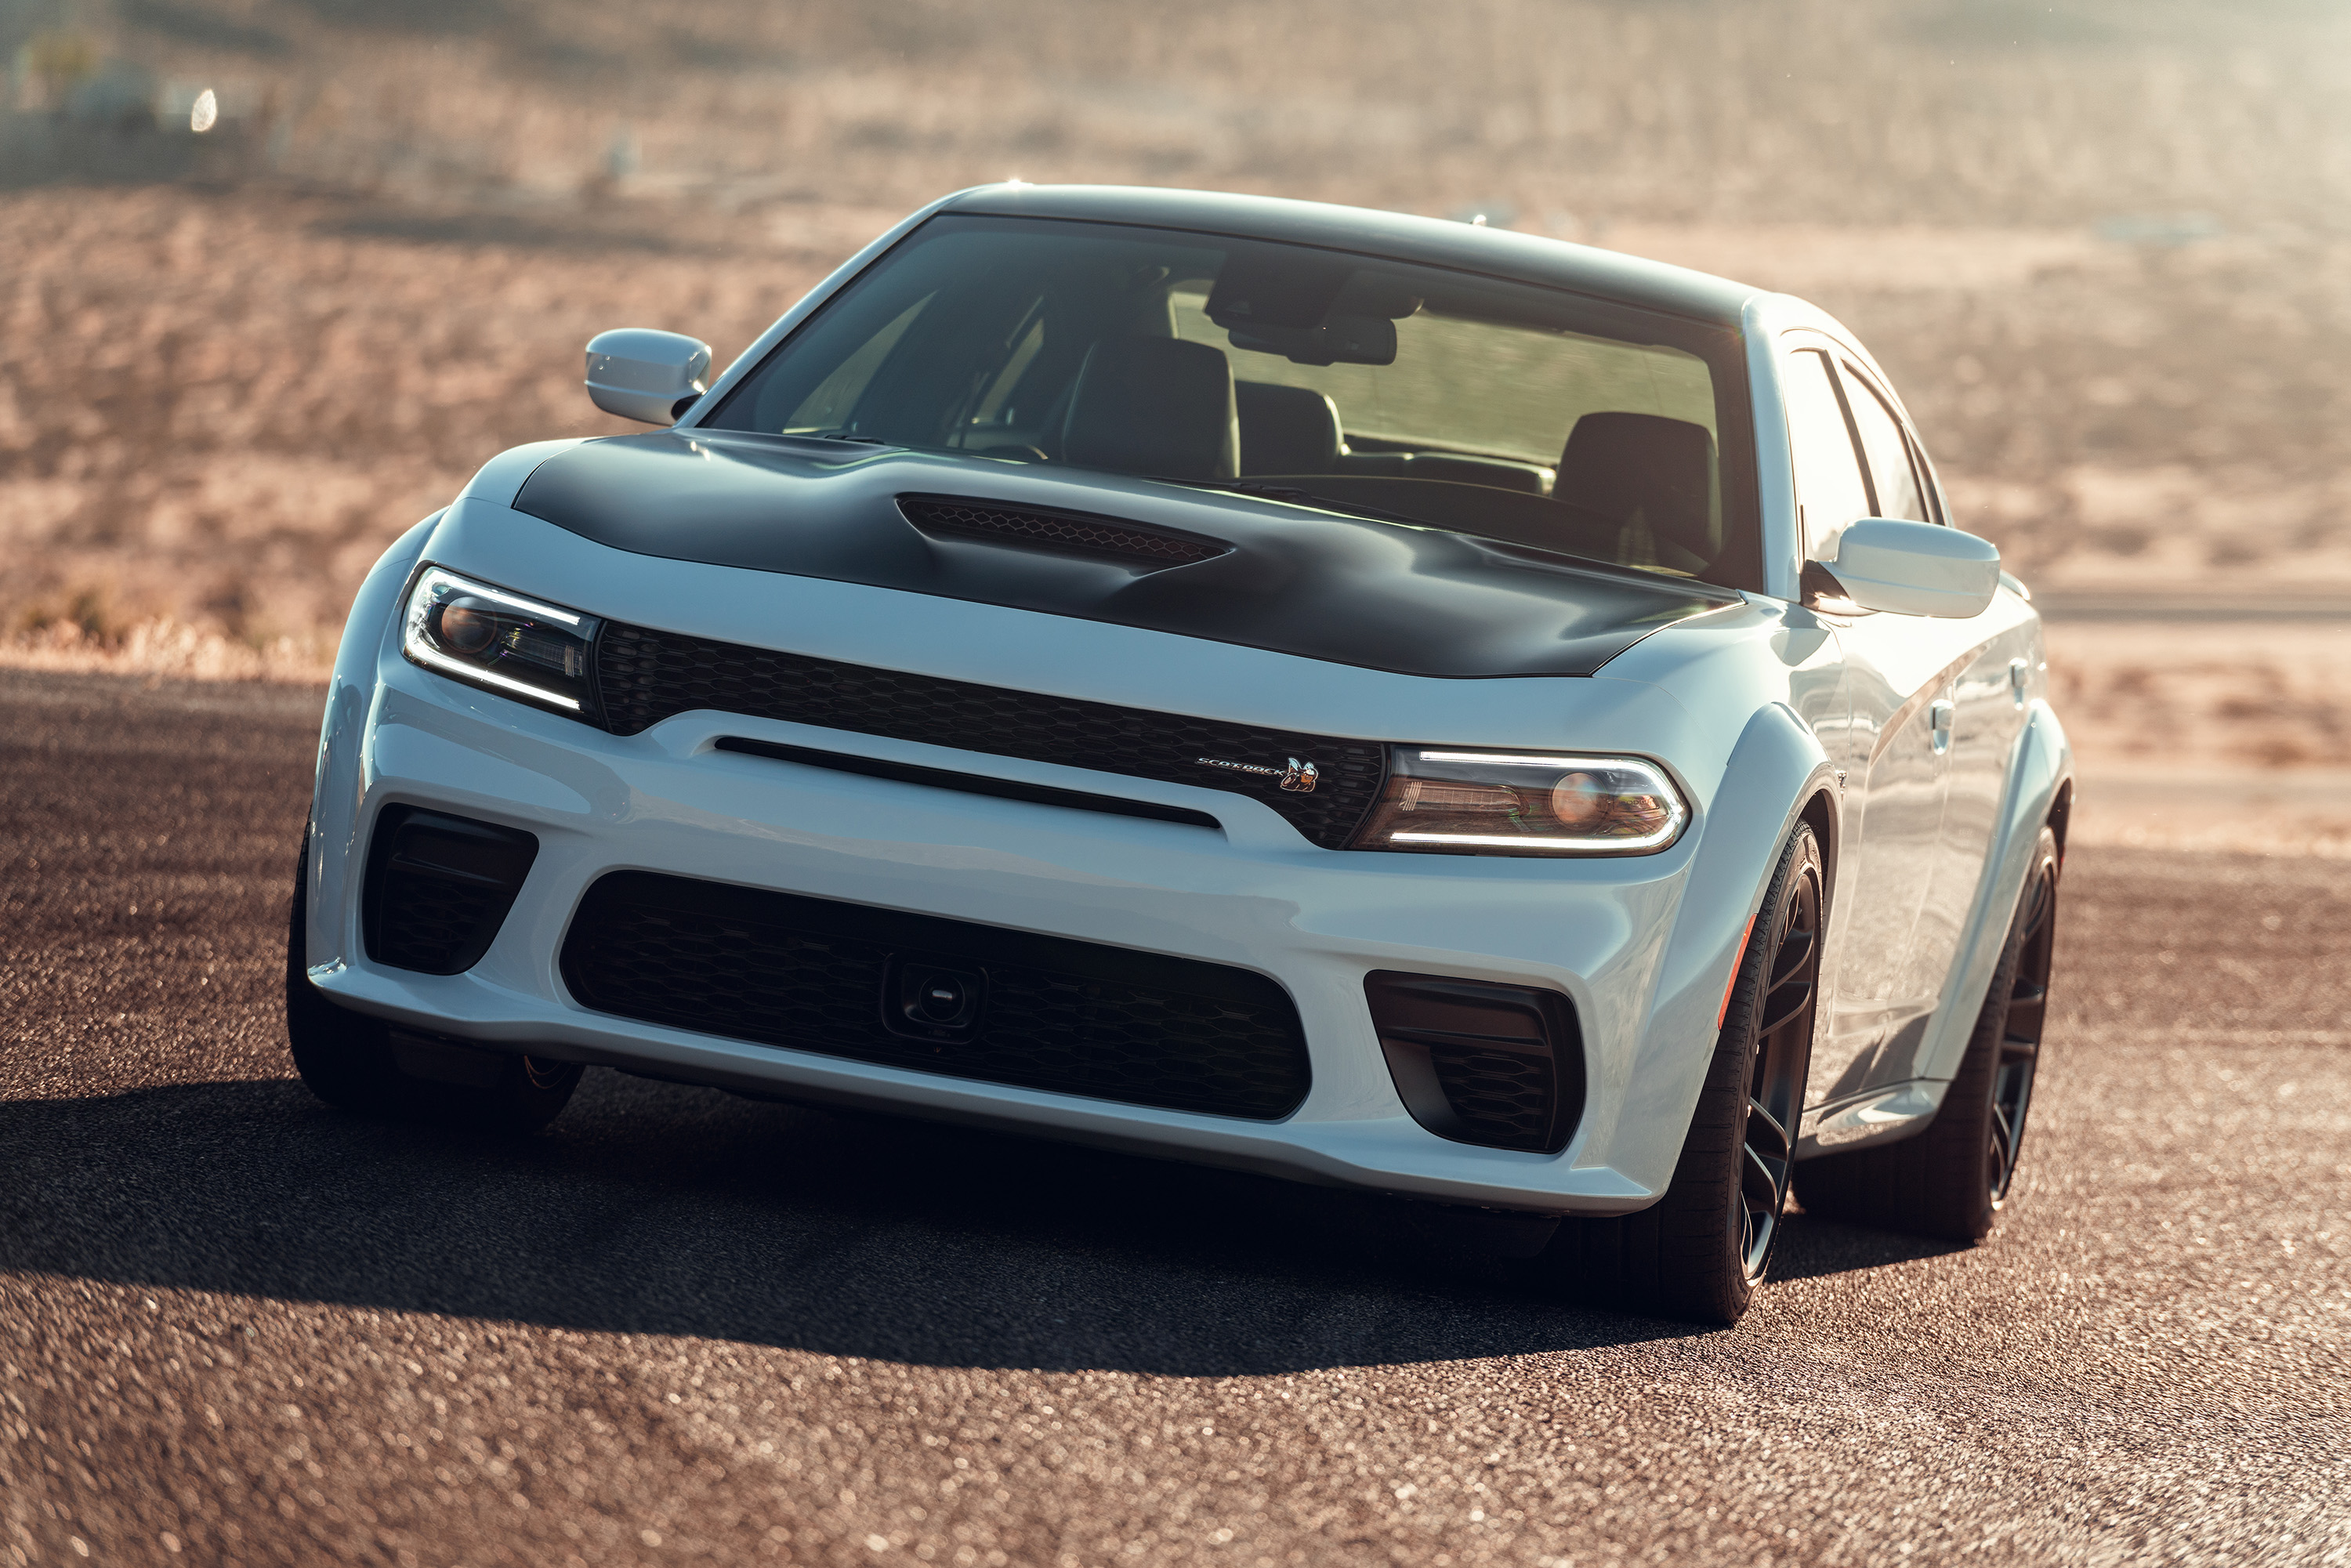 The 2020 Dodge Charger and Charger SRT Hellcat - The News Wheel